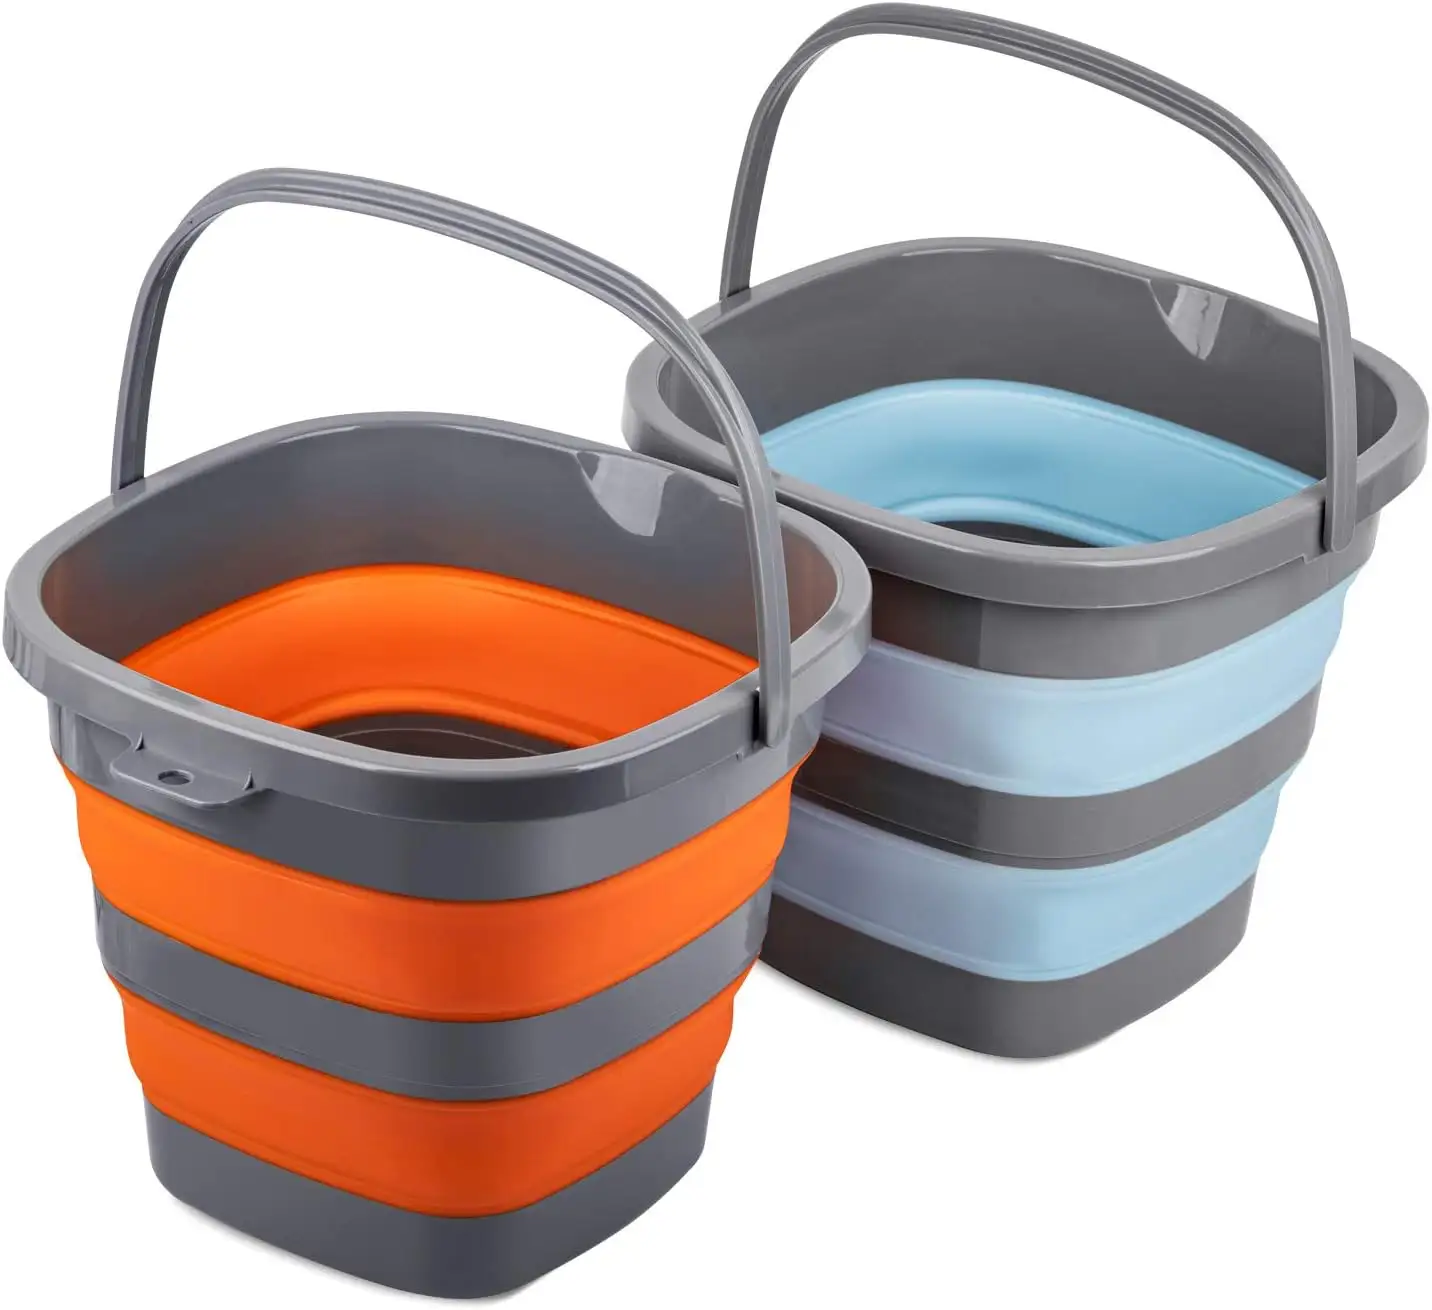 Household Outdoor Car Washing Tub 10 L Plastic Foldable Cleaning Mop Buckets color customization Car wash bucket